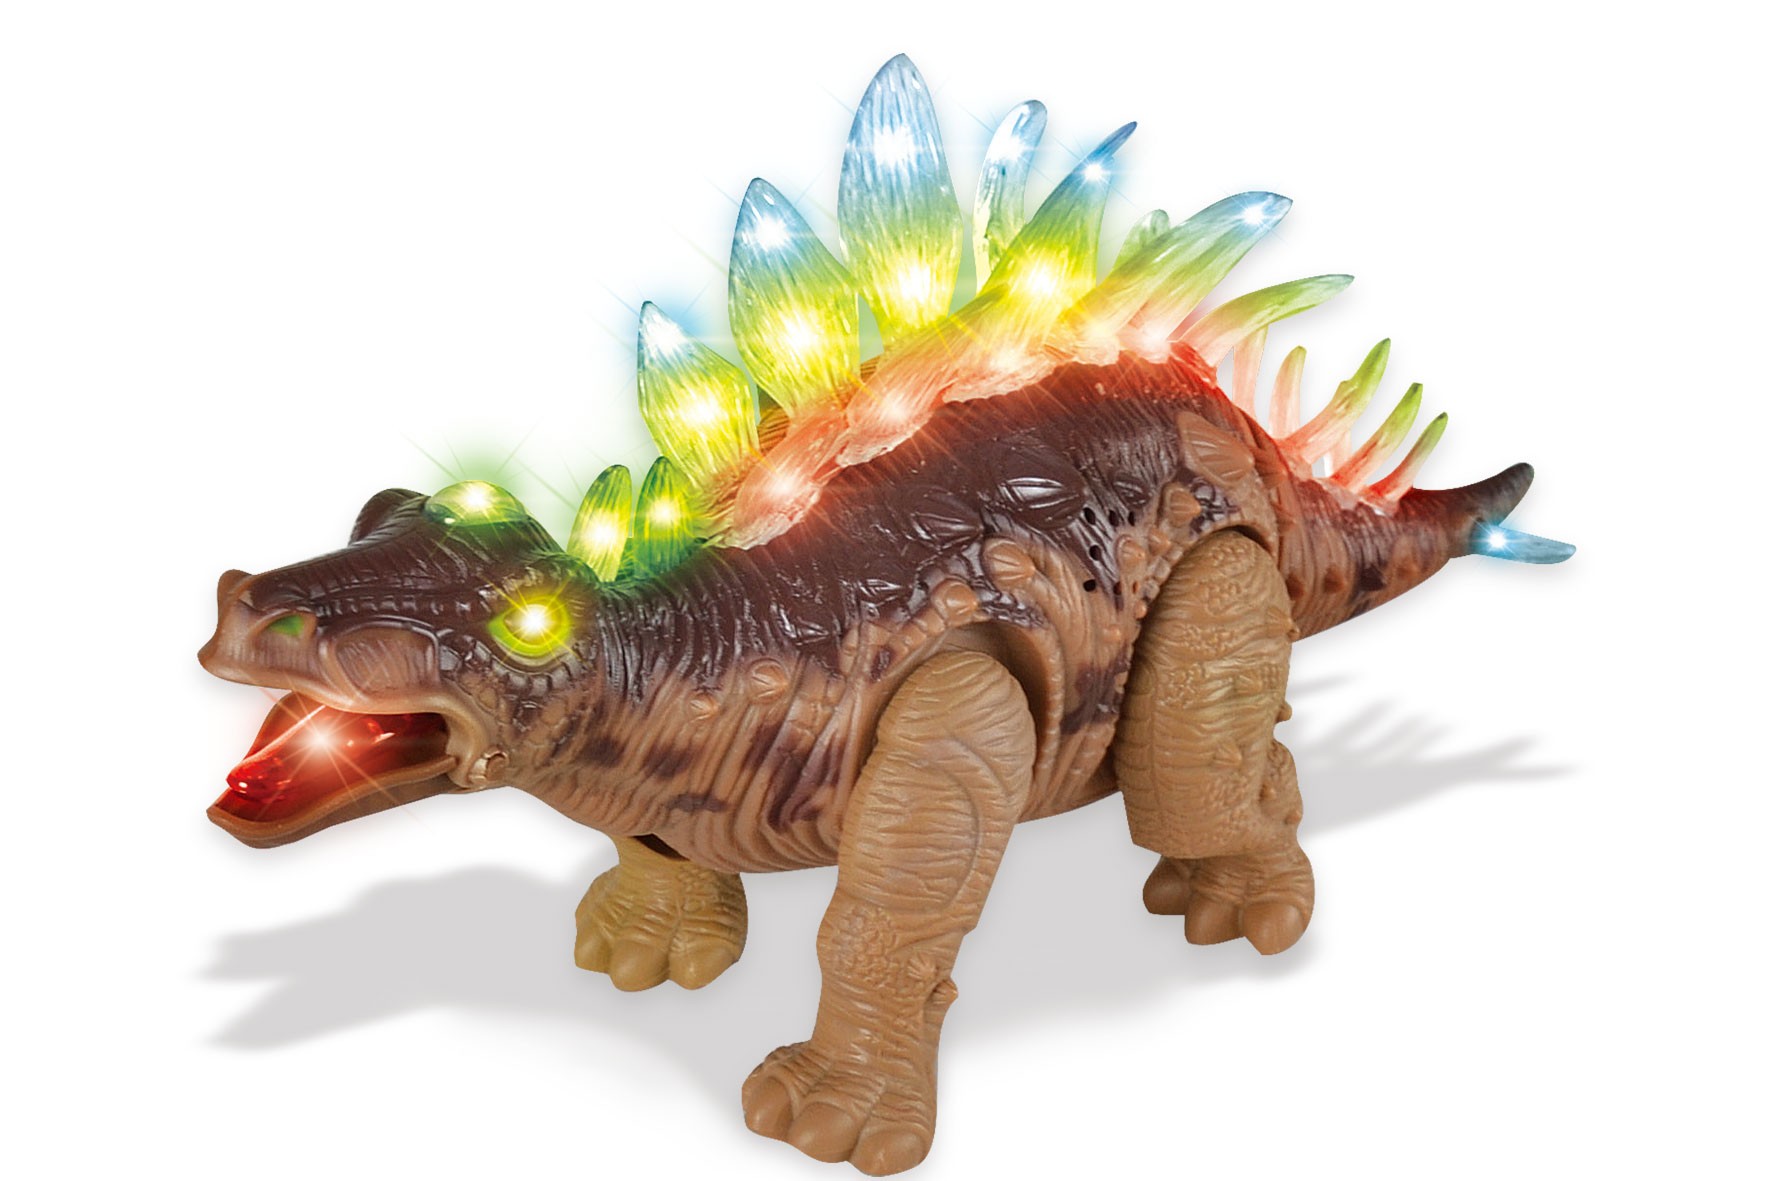 Stegosaurus Dinosaur With Lights And Sounds (Brown)